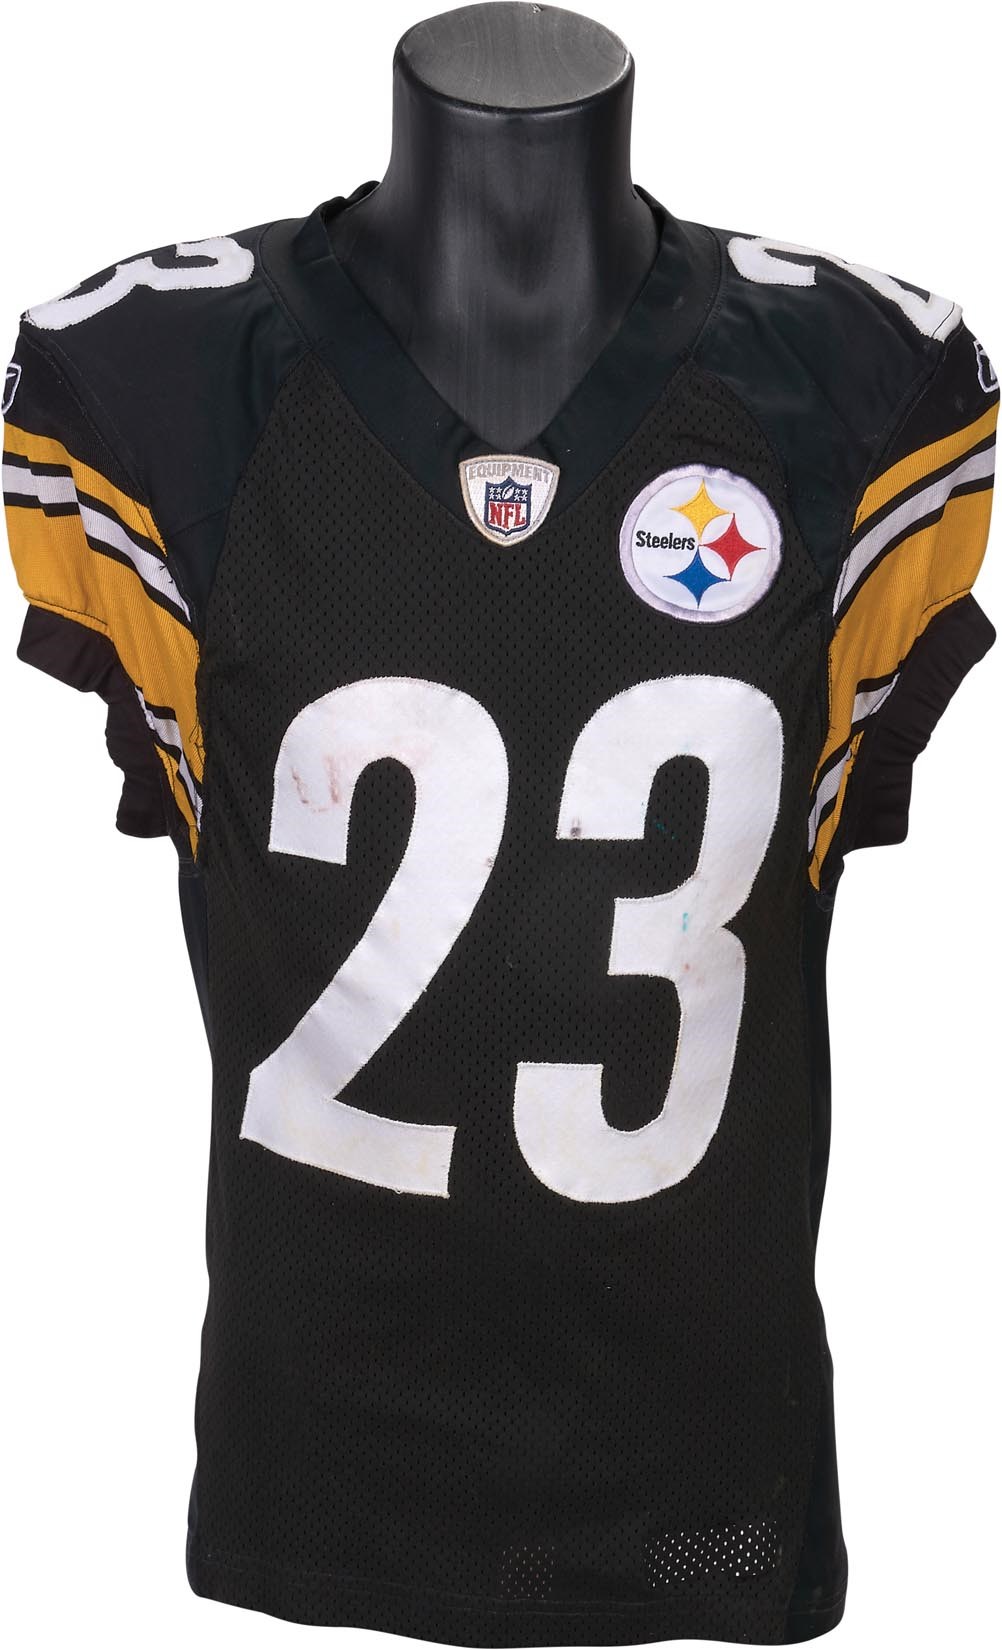 - 2009-2010 Tyrone Carter Game Worn Pittsburgh Steelers Jersey (Photo-Matched to Multiple Games)